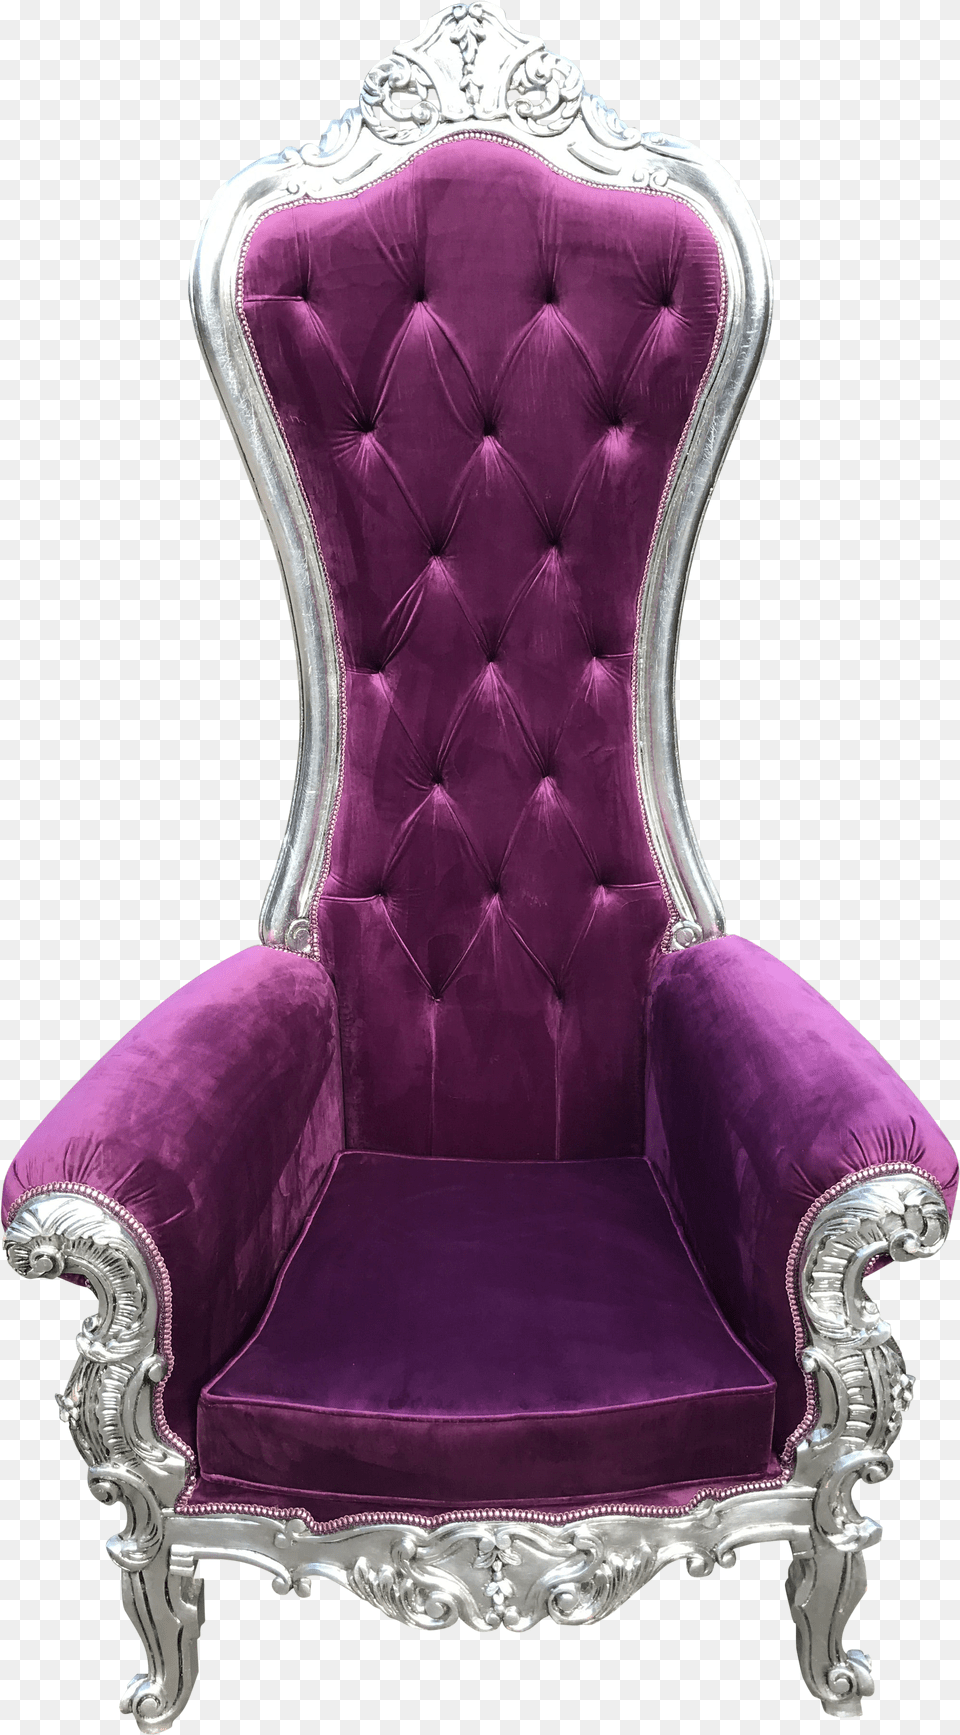 Baroque Style Tufted Purple Velvet Throne Chair Throne Free Transparent Png